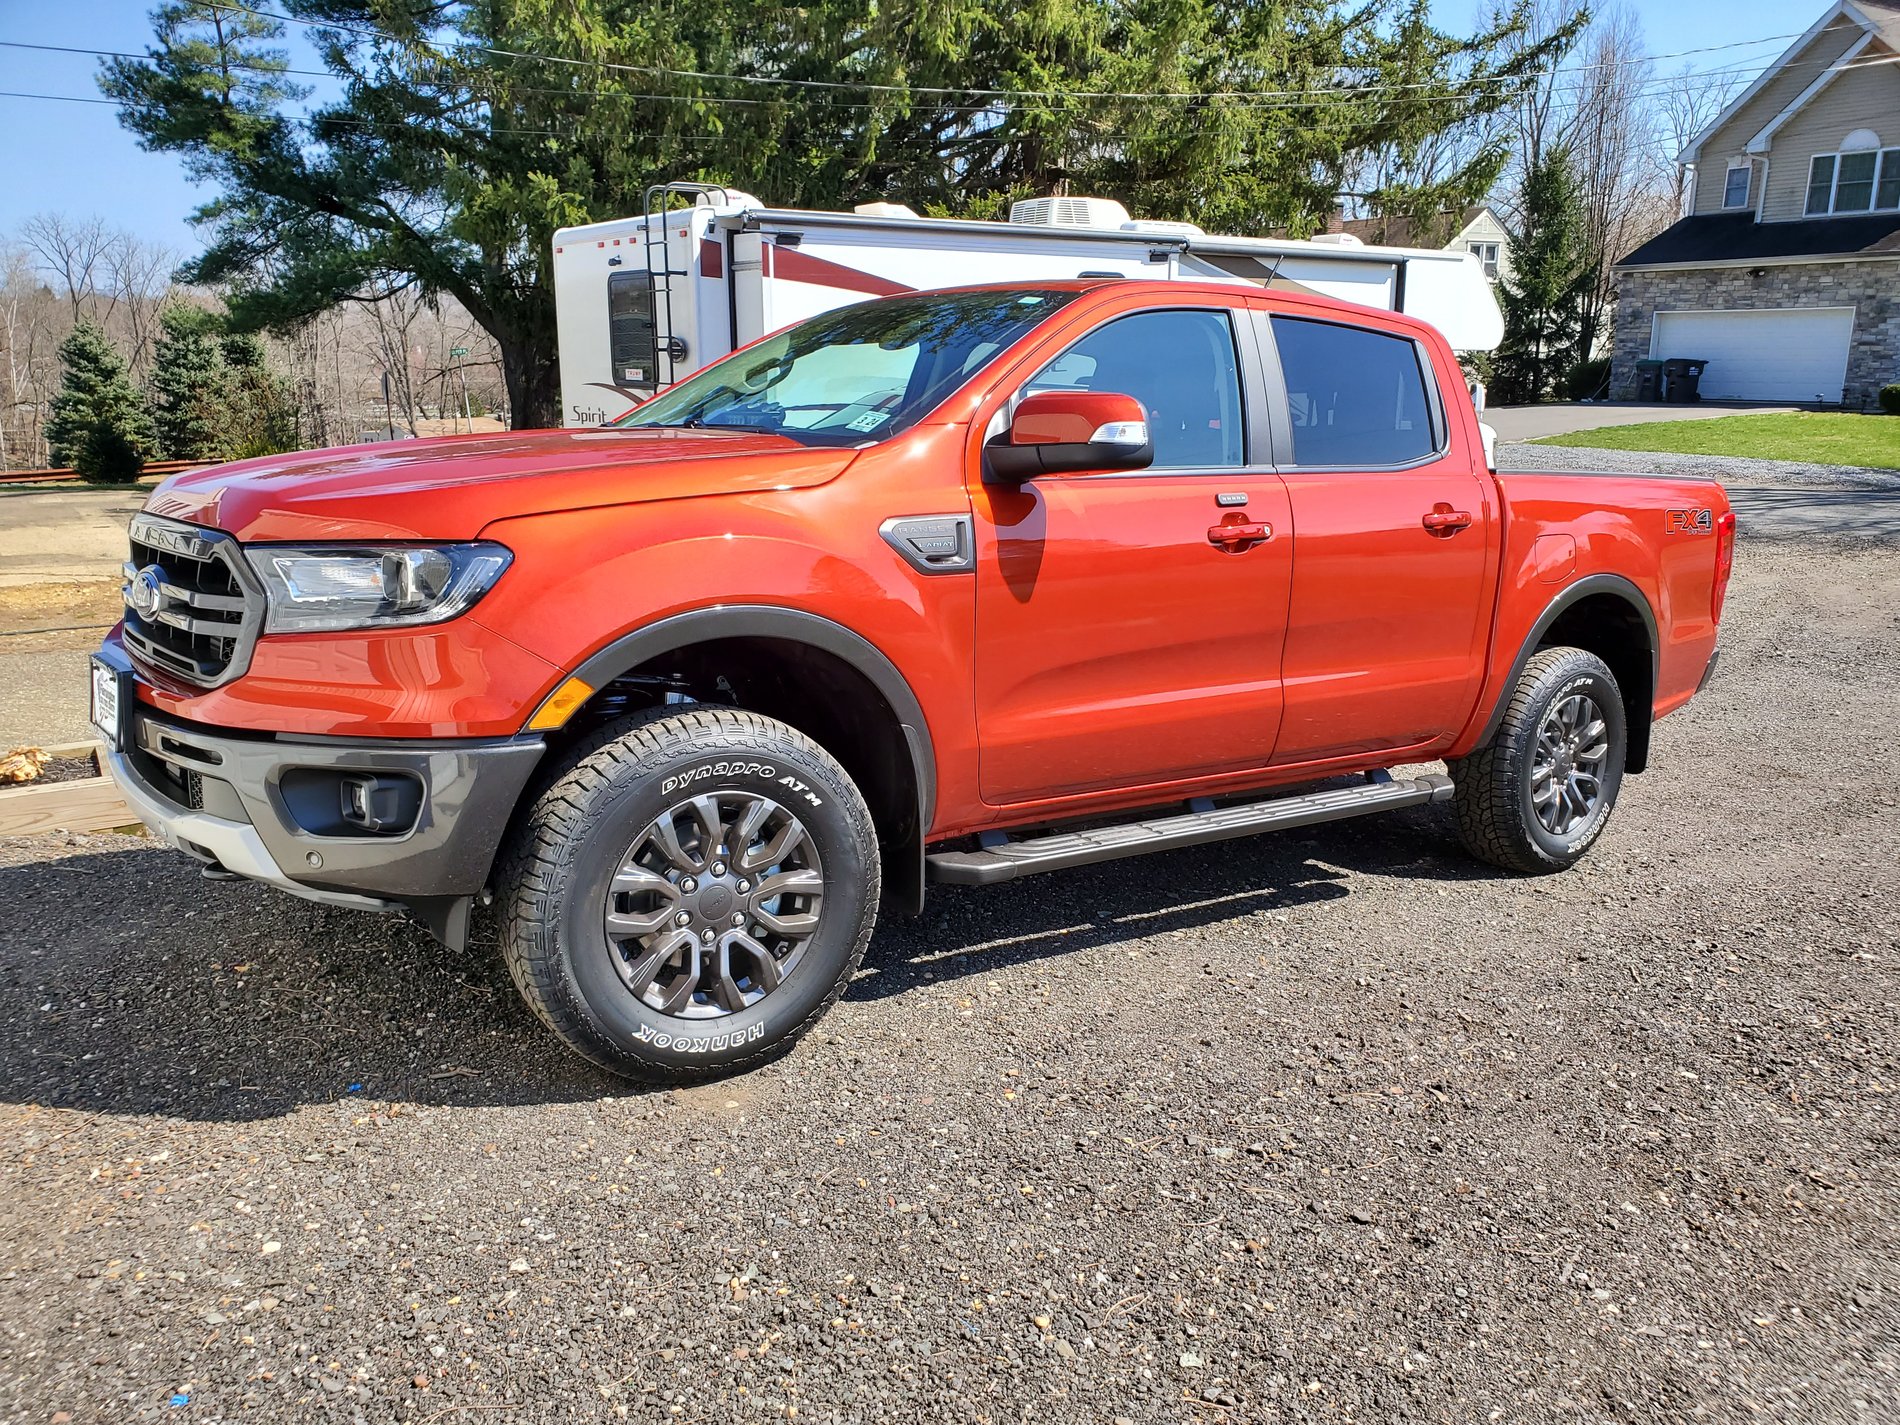 Ford Ranger Lets see your sport package trucks 20190404_144138